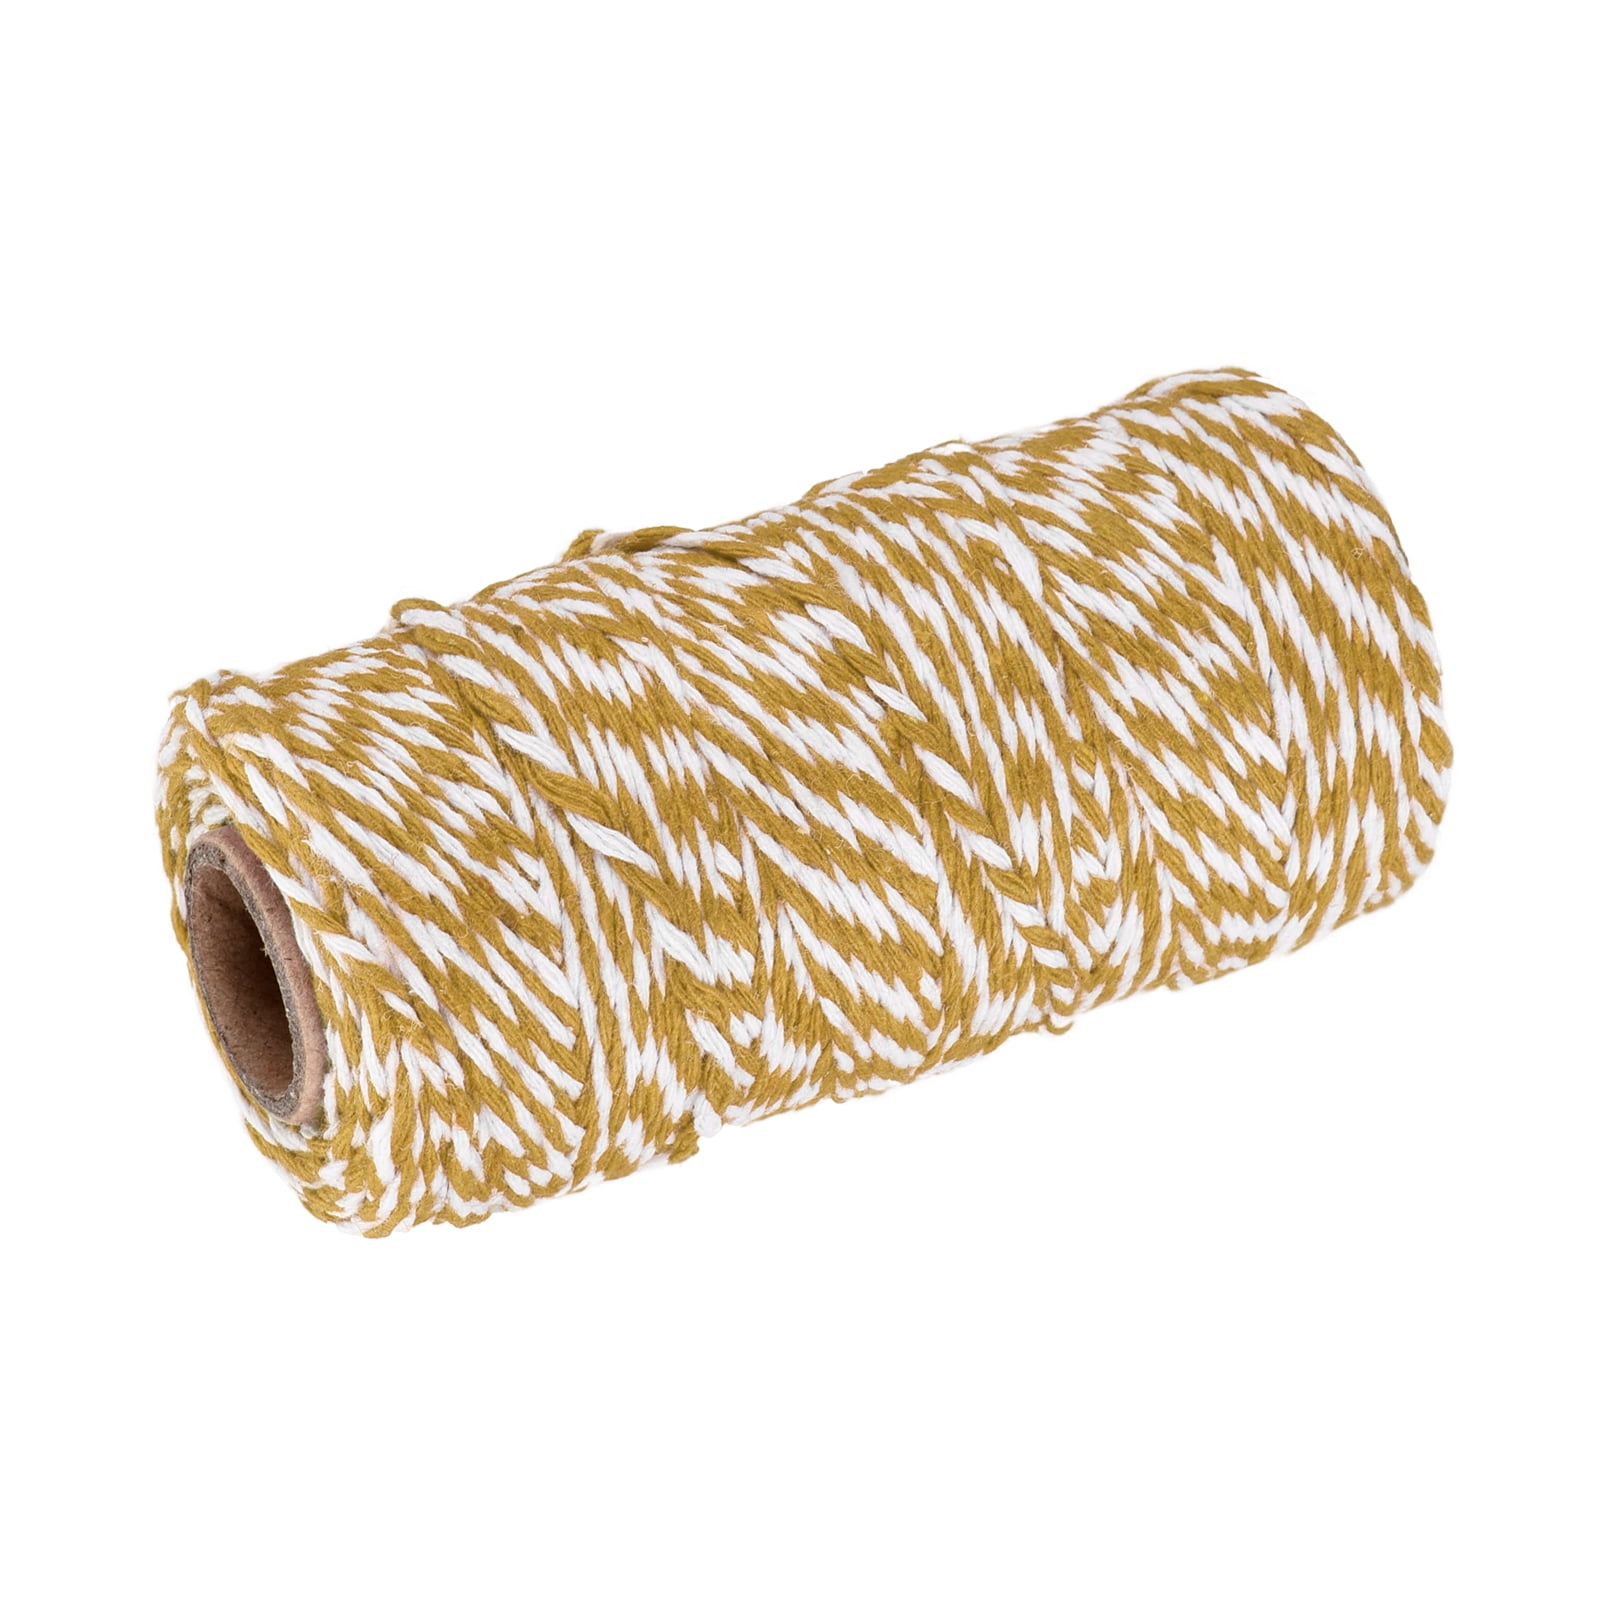 Twine Packing String Wrapping Cotton Twine 100M Brown and White